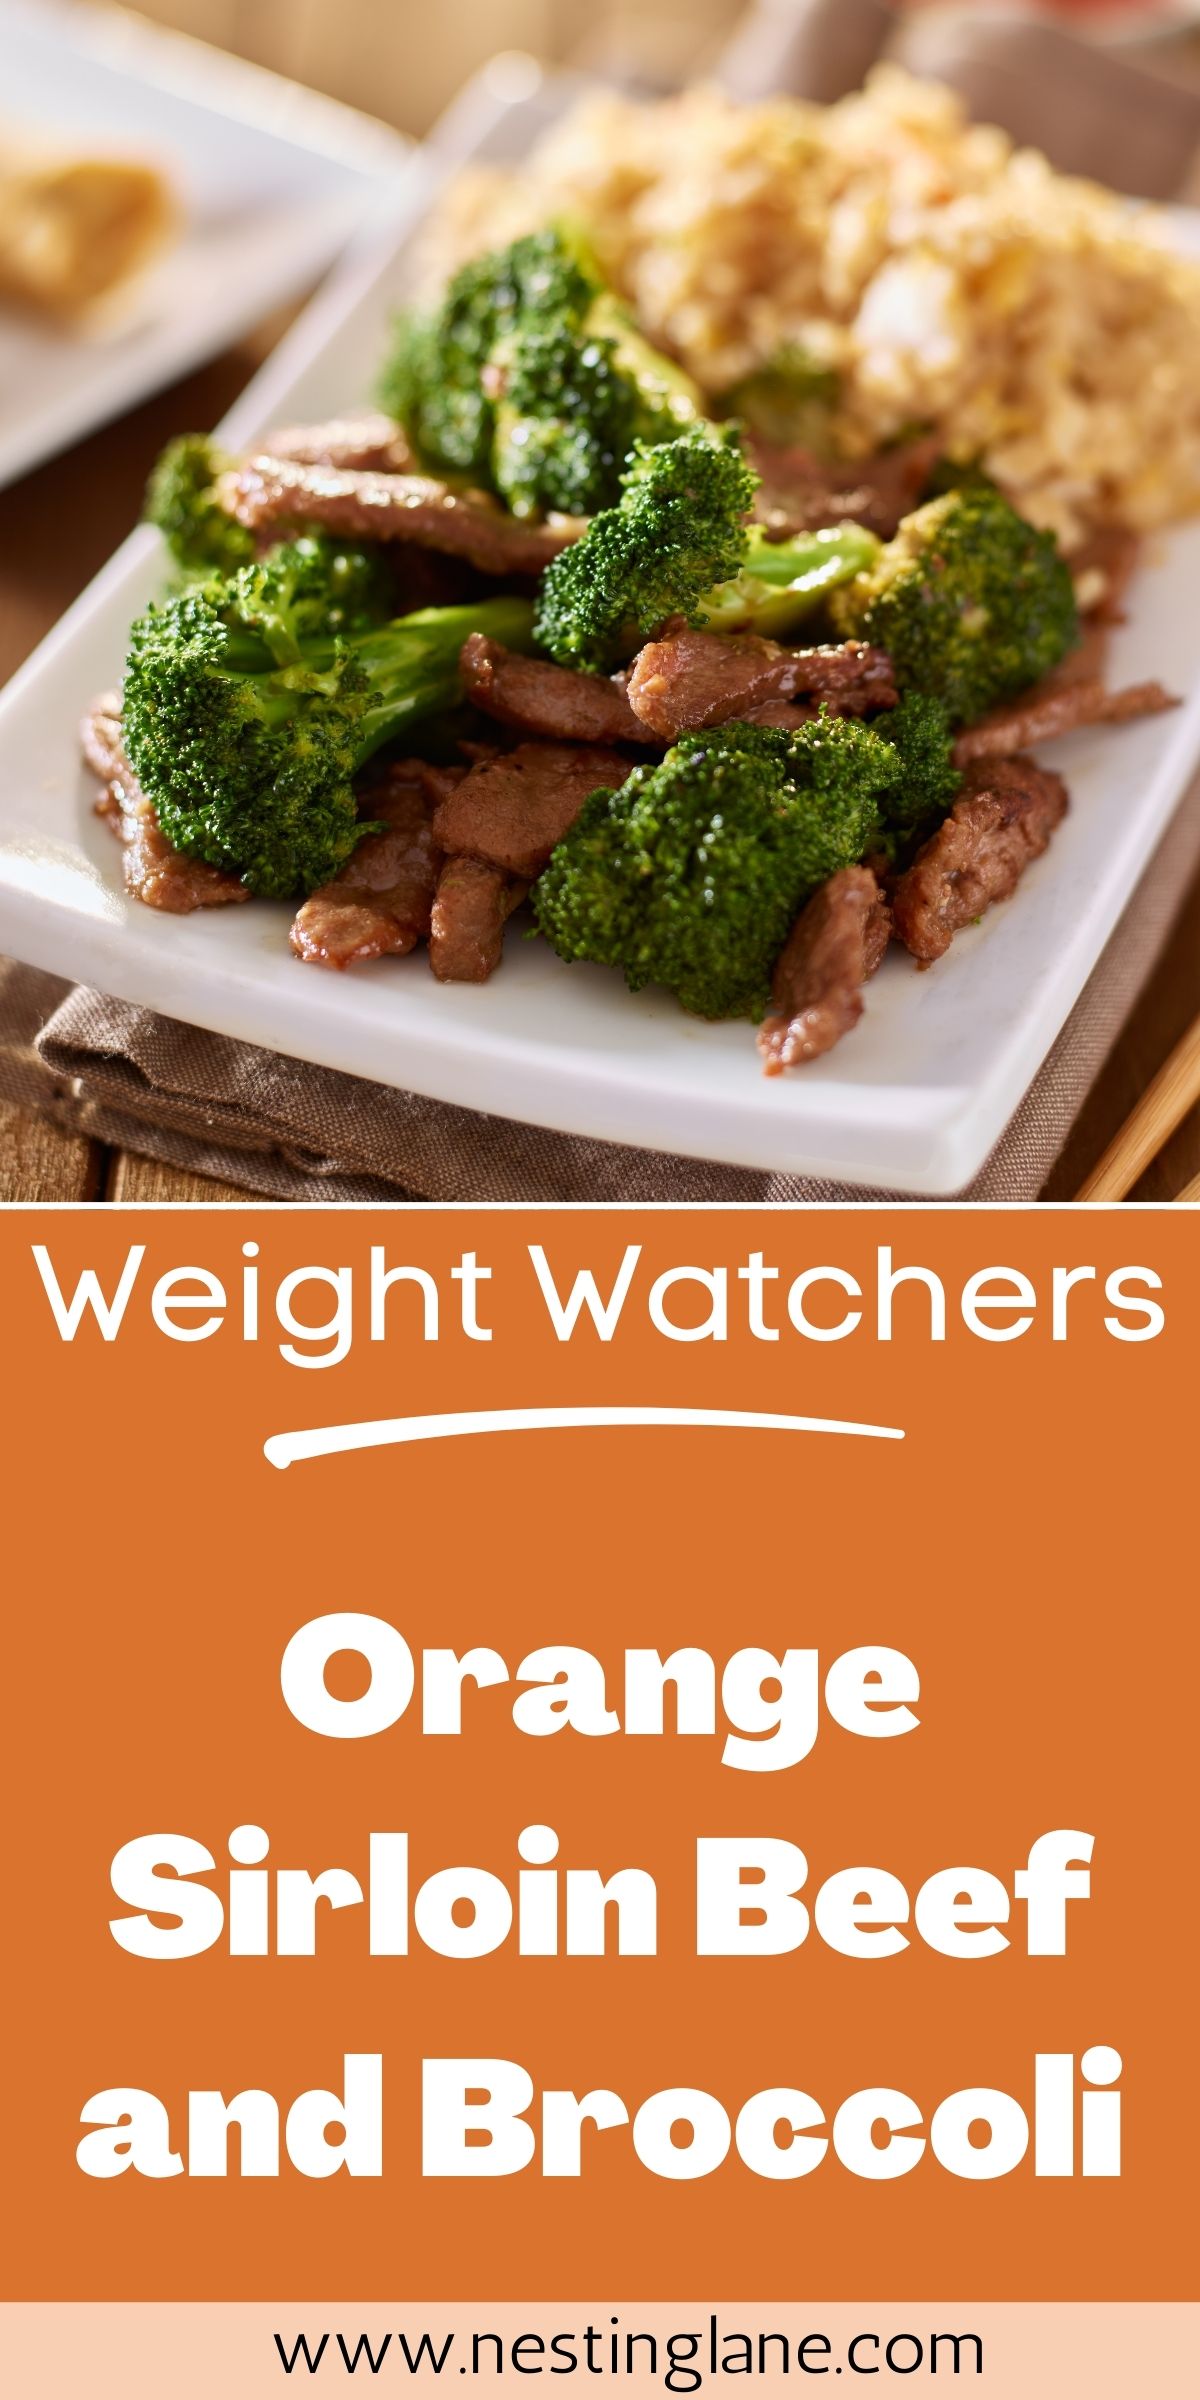 Graphic for Pinterest of Weight Watchers Orange Sirloin Beef and Broccoli Recipe.